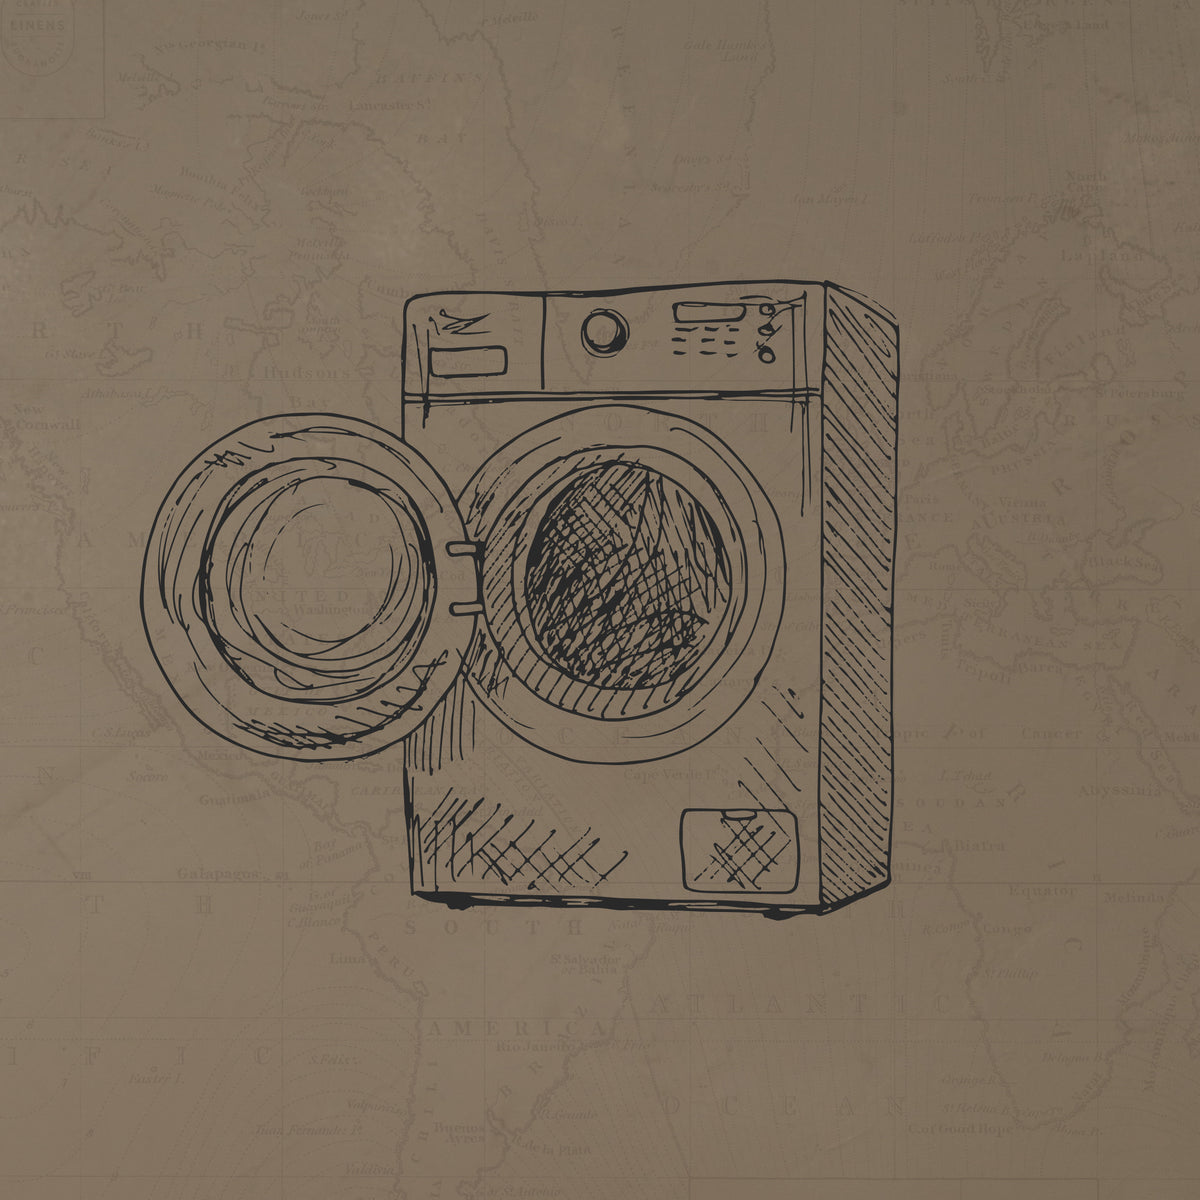 A hand-drawn image of a washing machine with an open door. data-image-id=